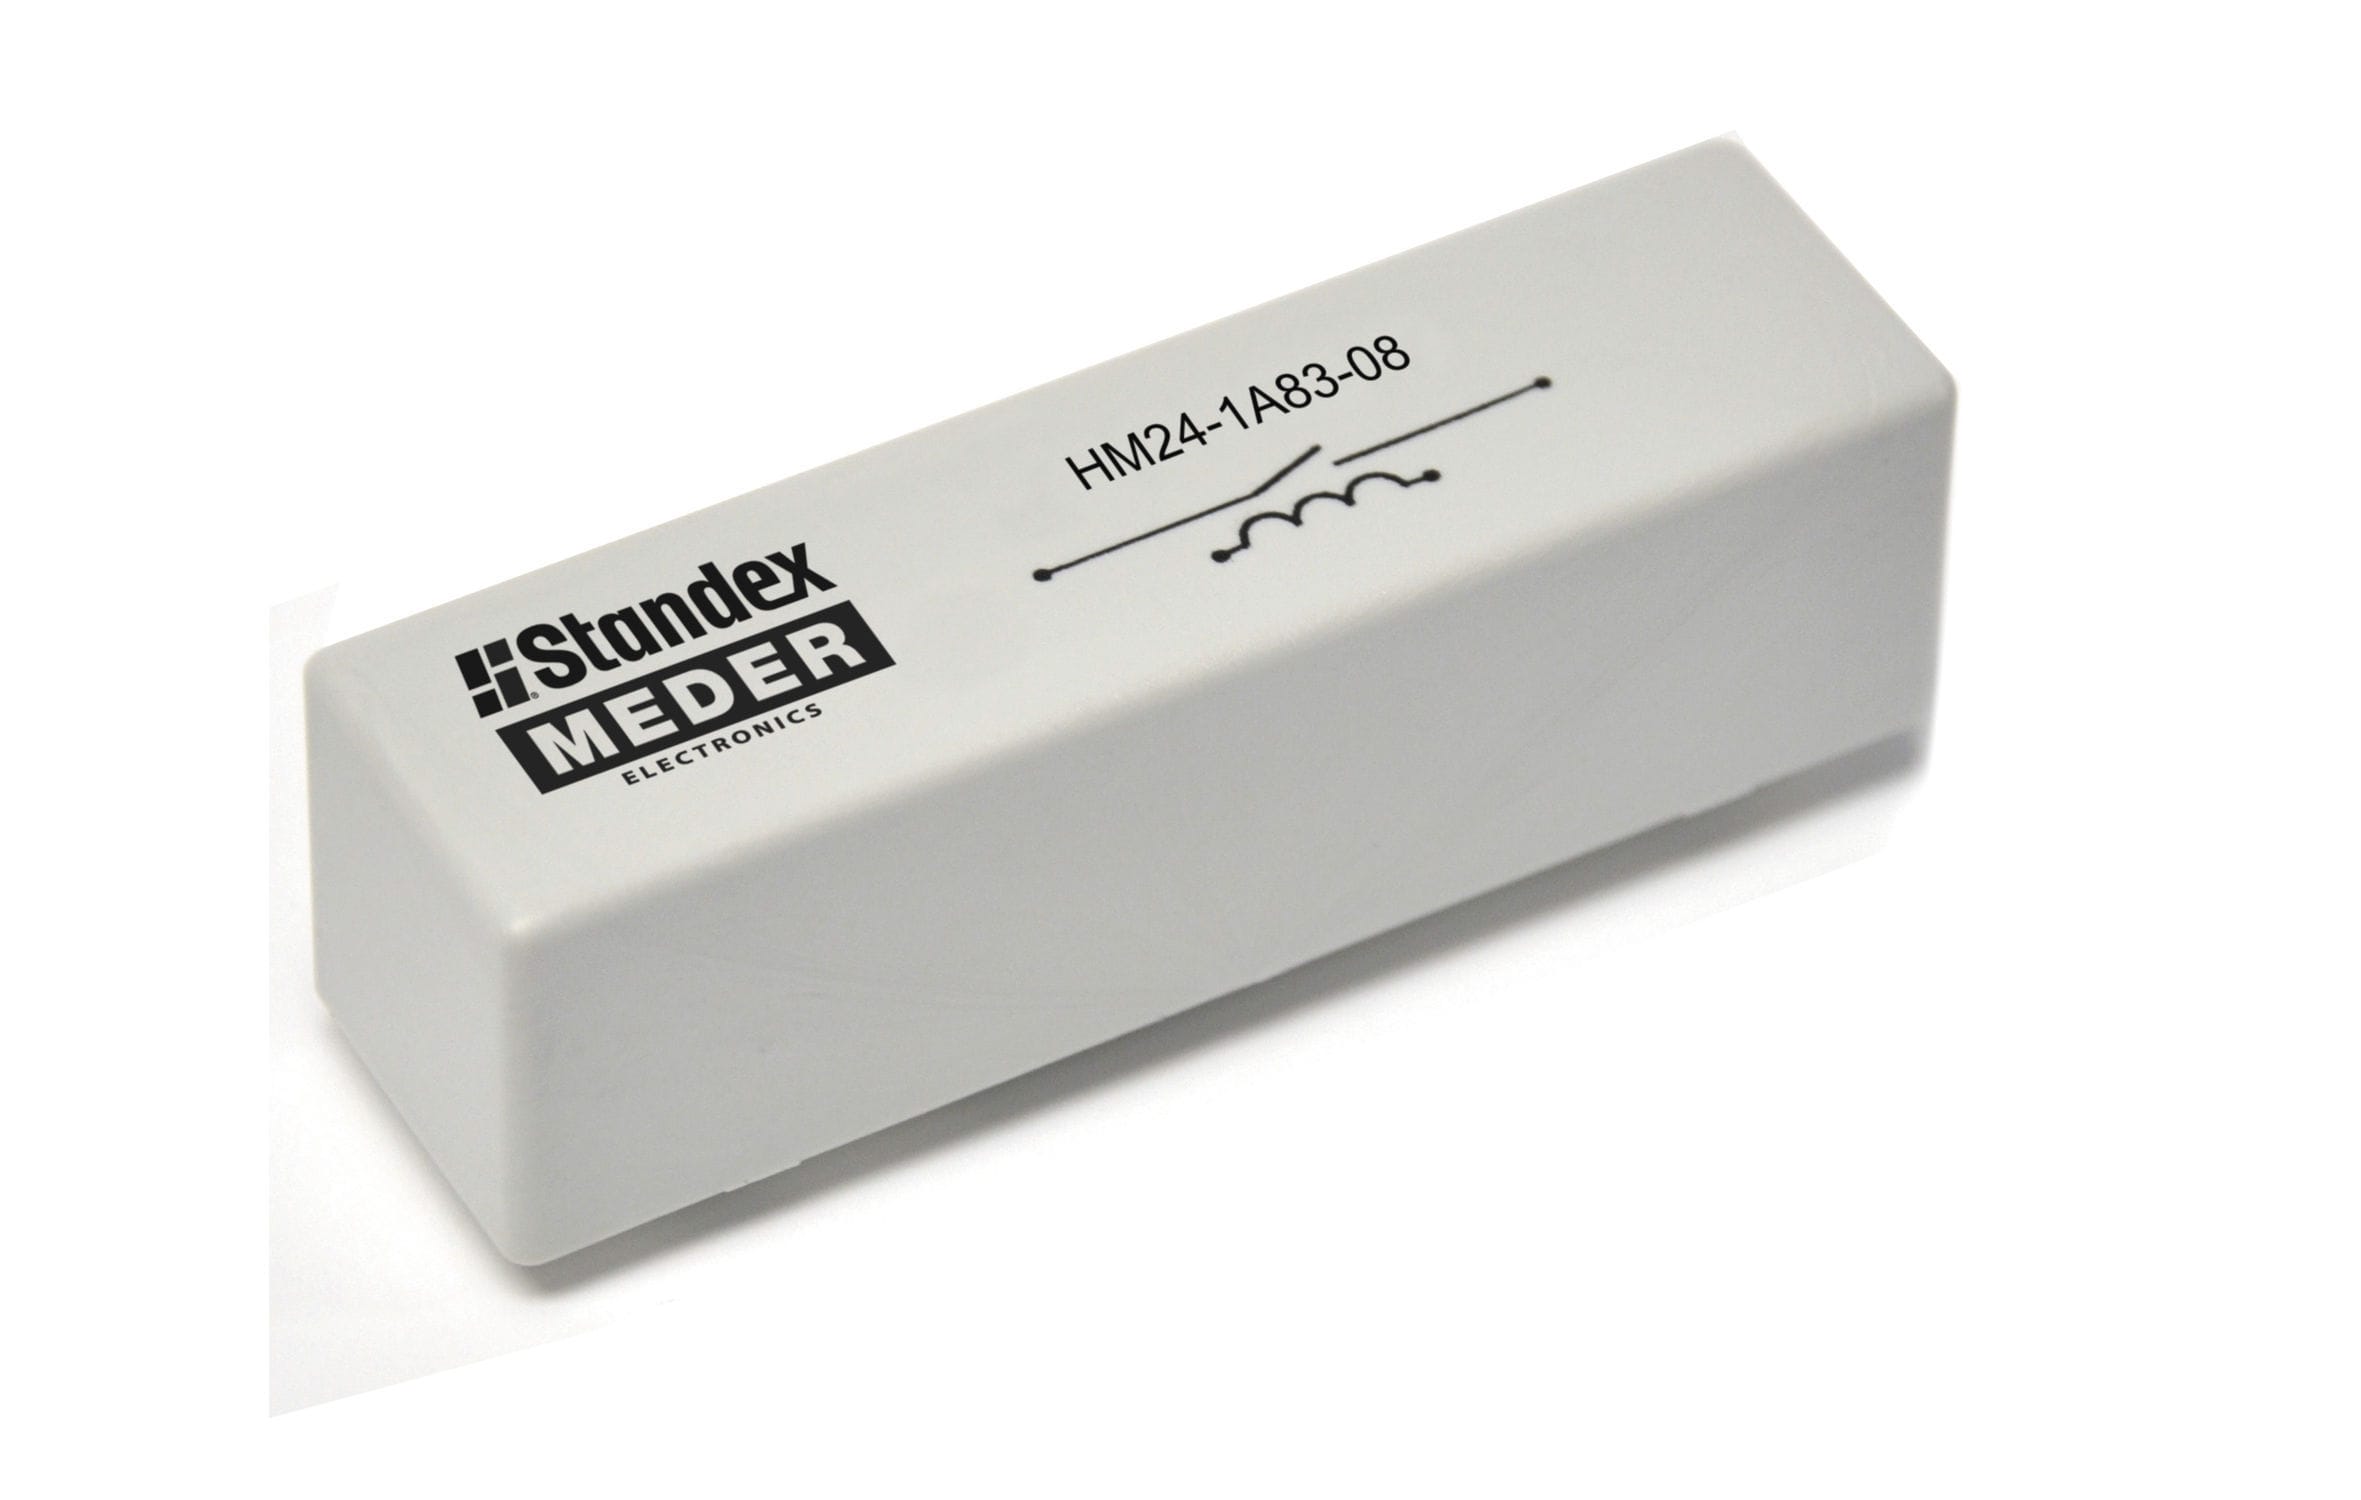 High-voltage reed relay - HM - Standex-Meder Electronics GmbH